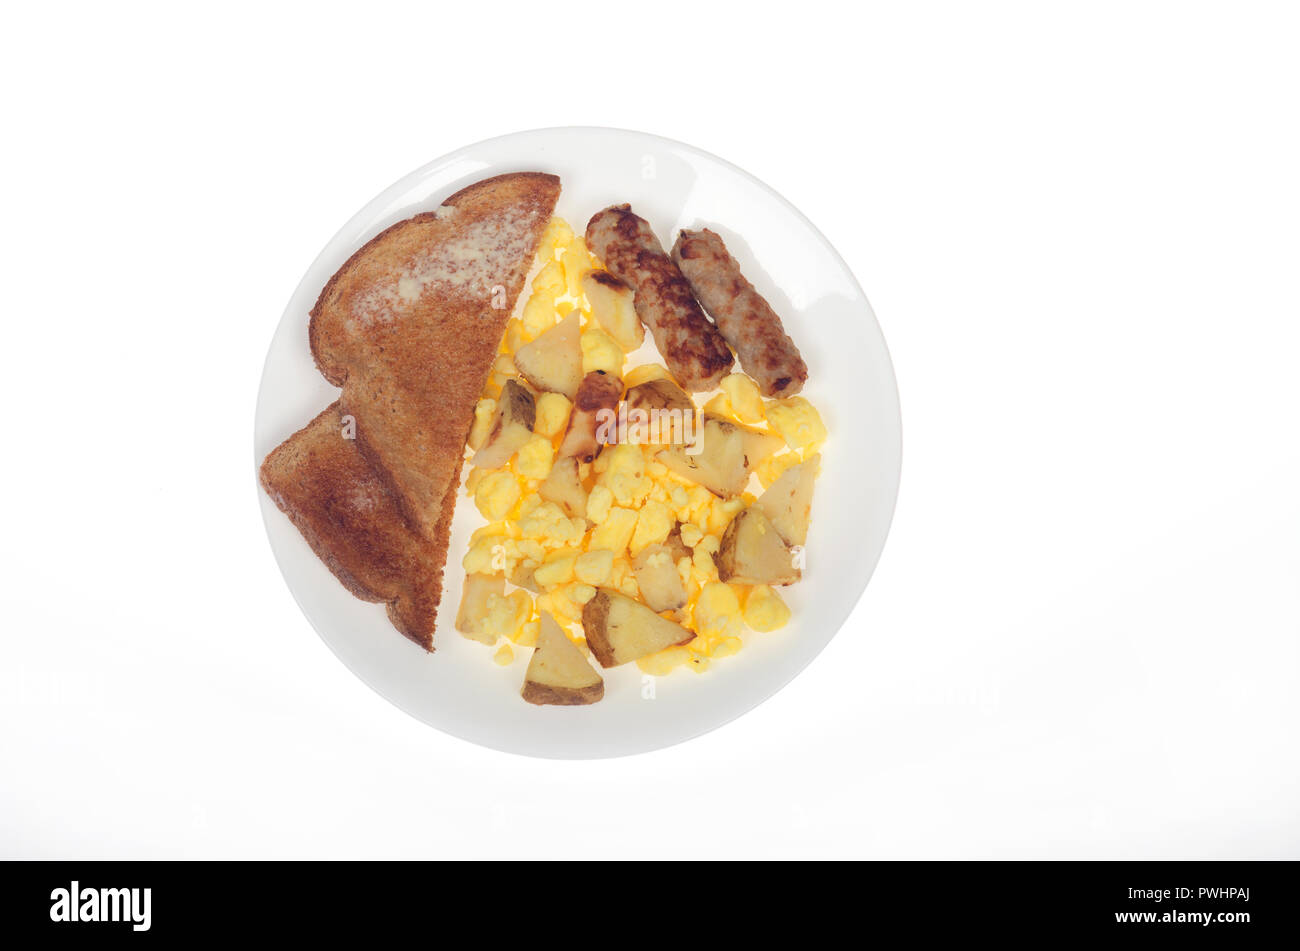 Scrambled eggs, roasted potatoes, sausage links and whole wheat bread Stock Photo